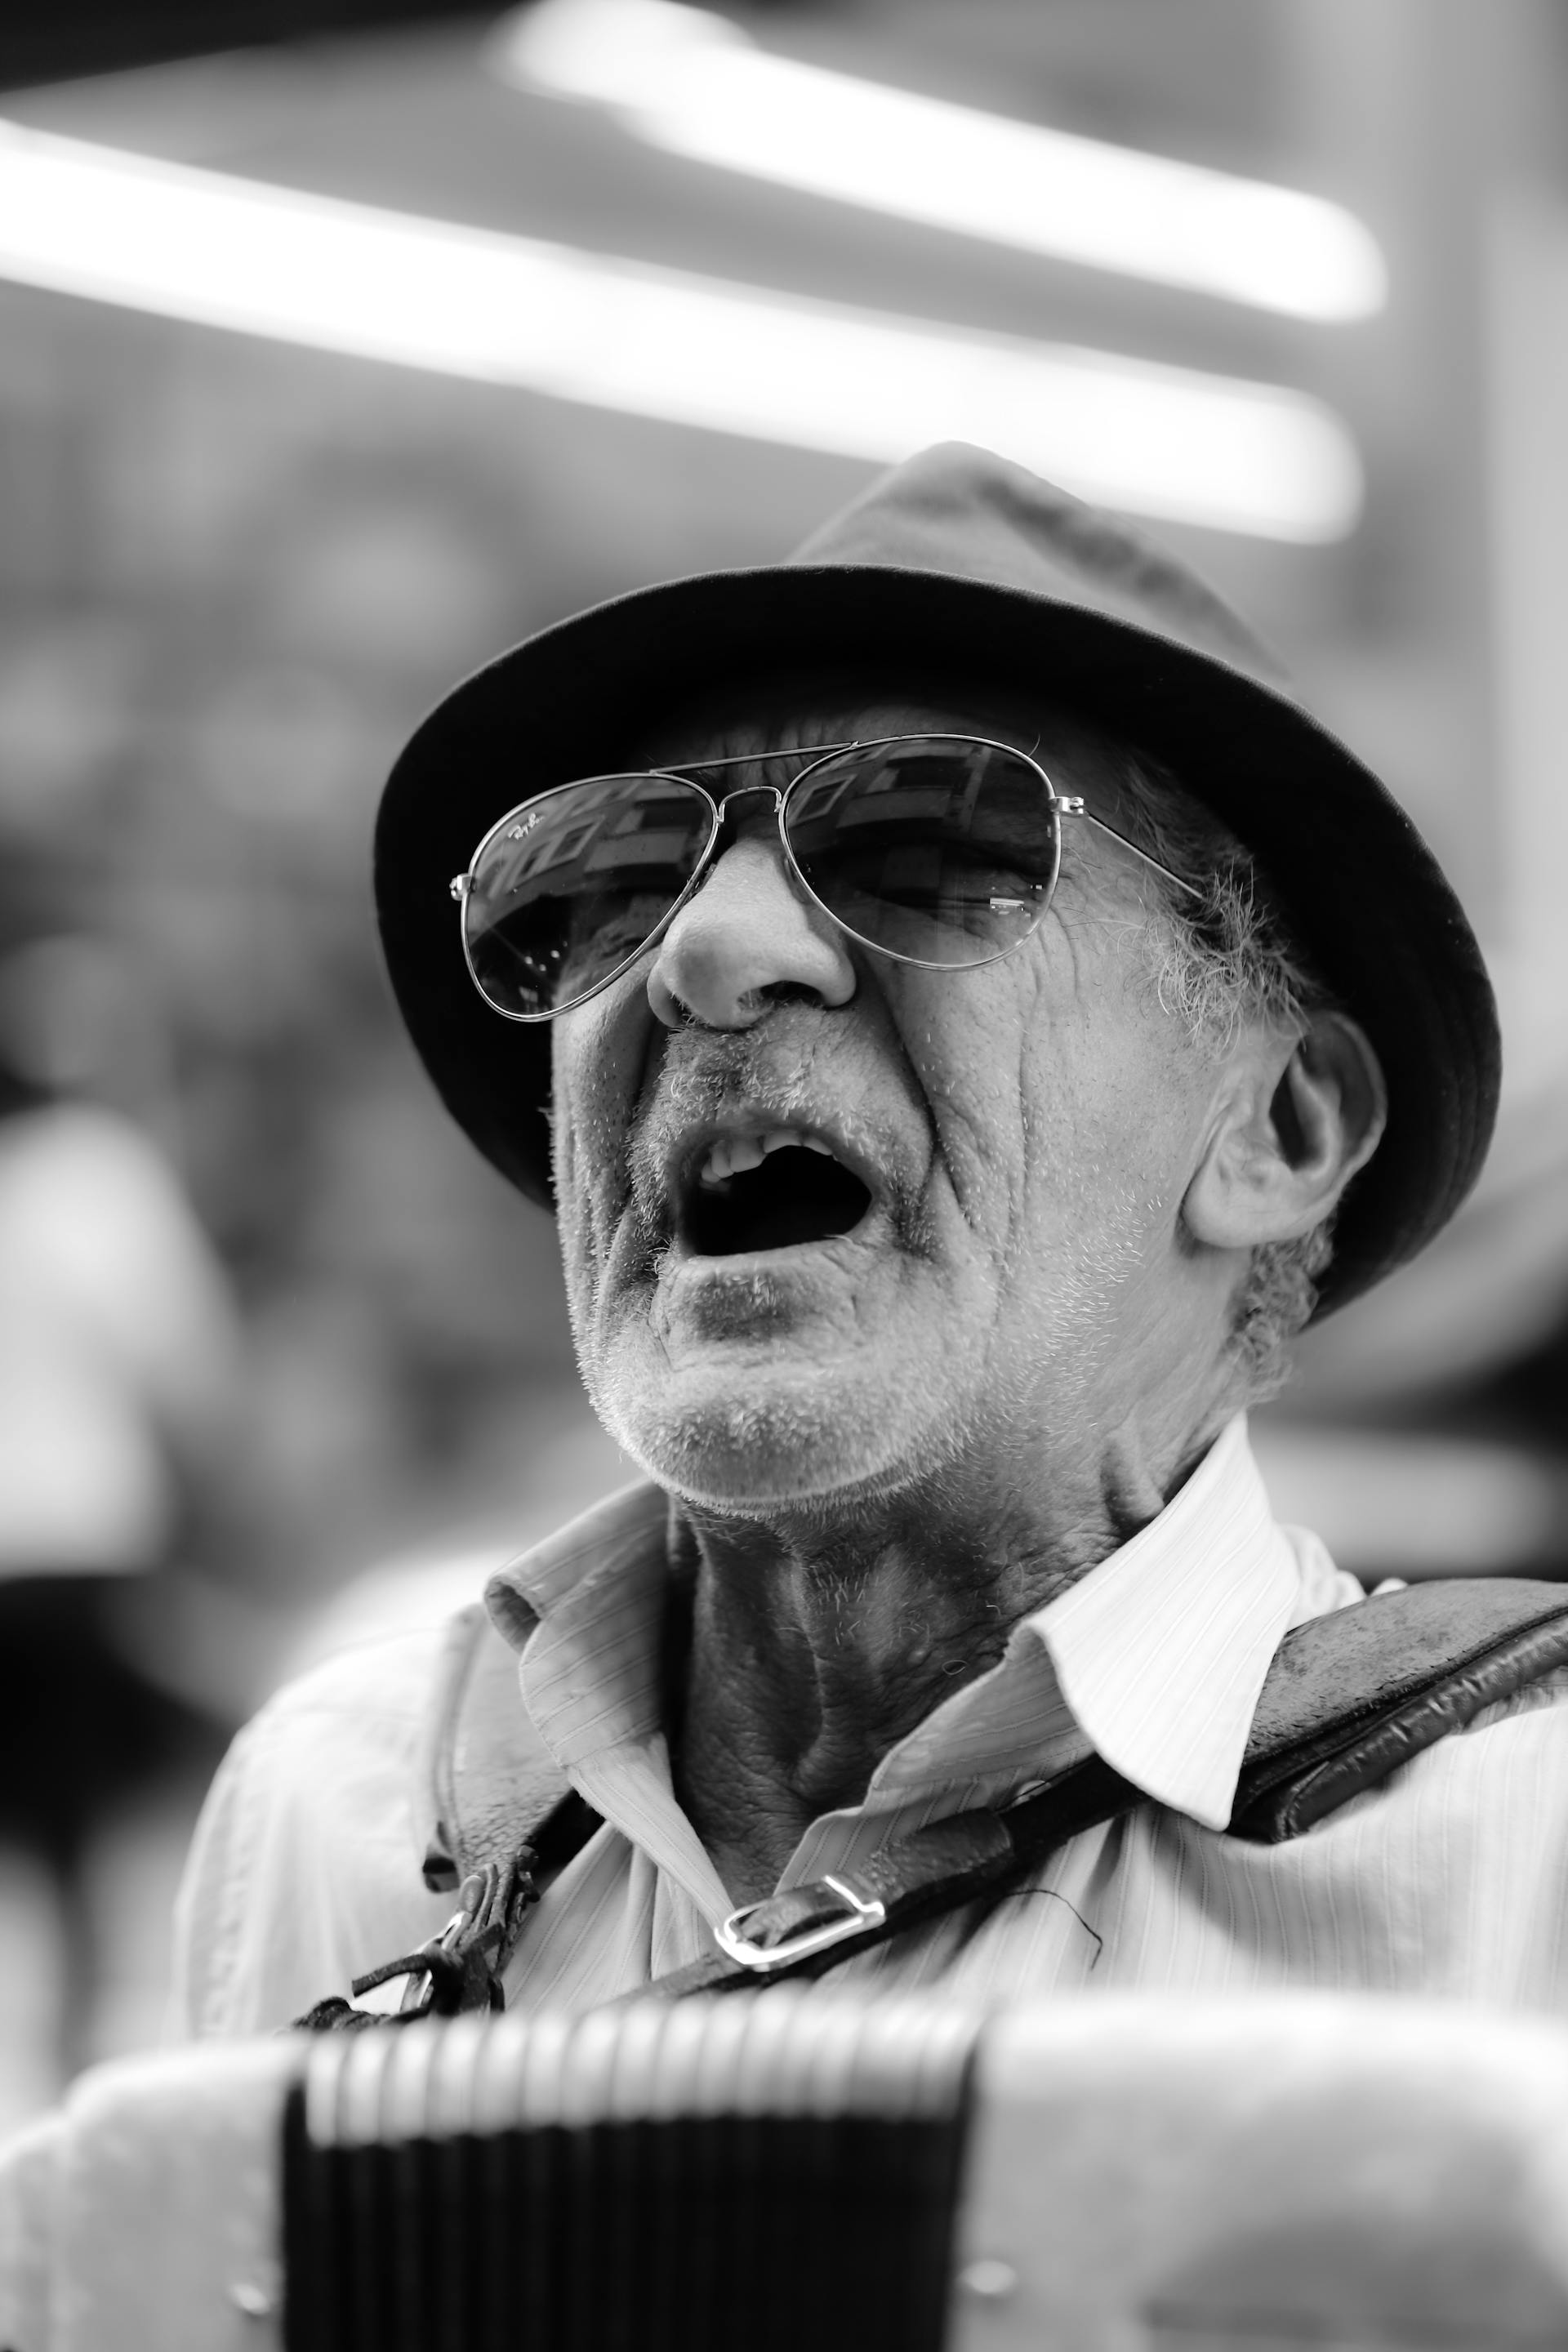 An old man with his mouth open | Source: Pexels